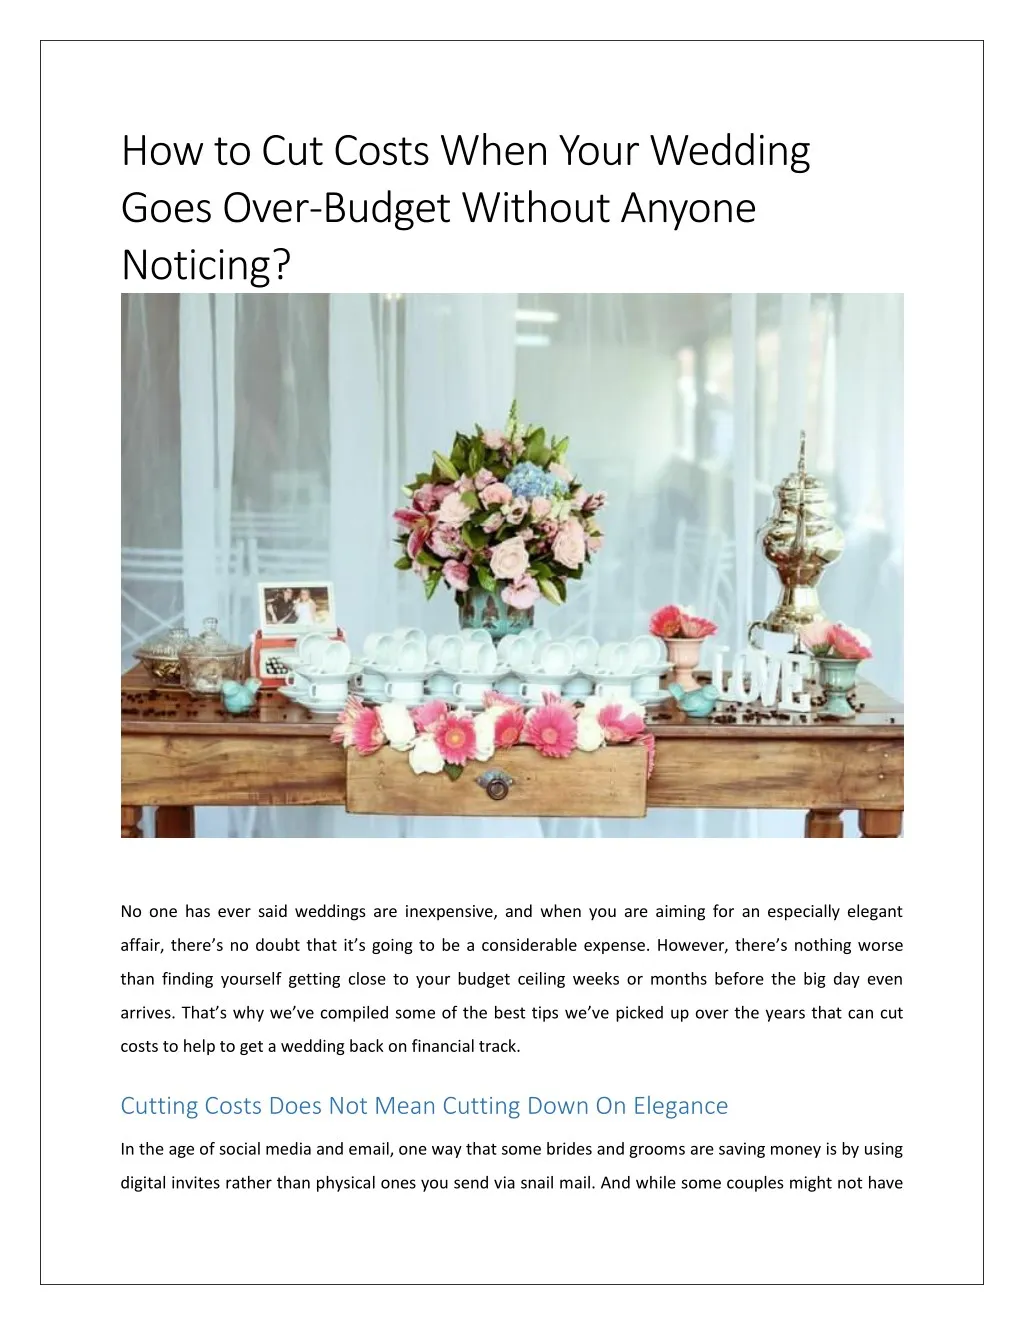 ho to cut costs when your wedding goes